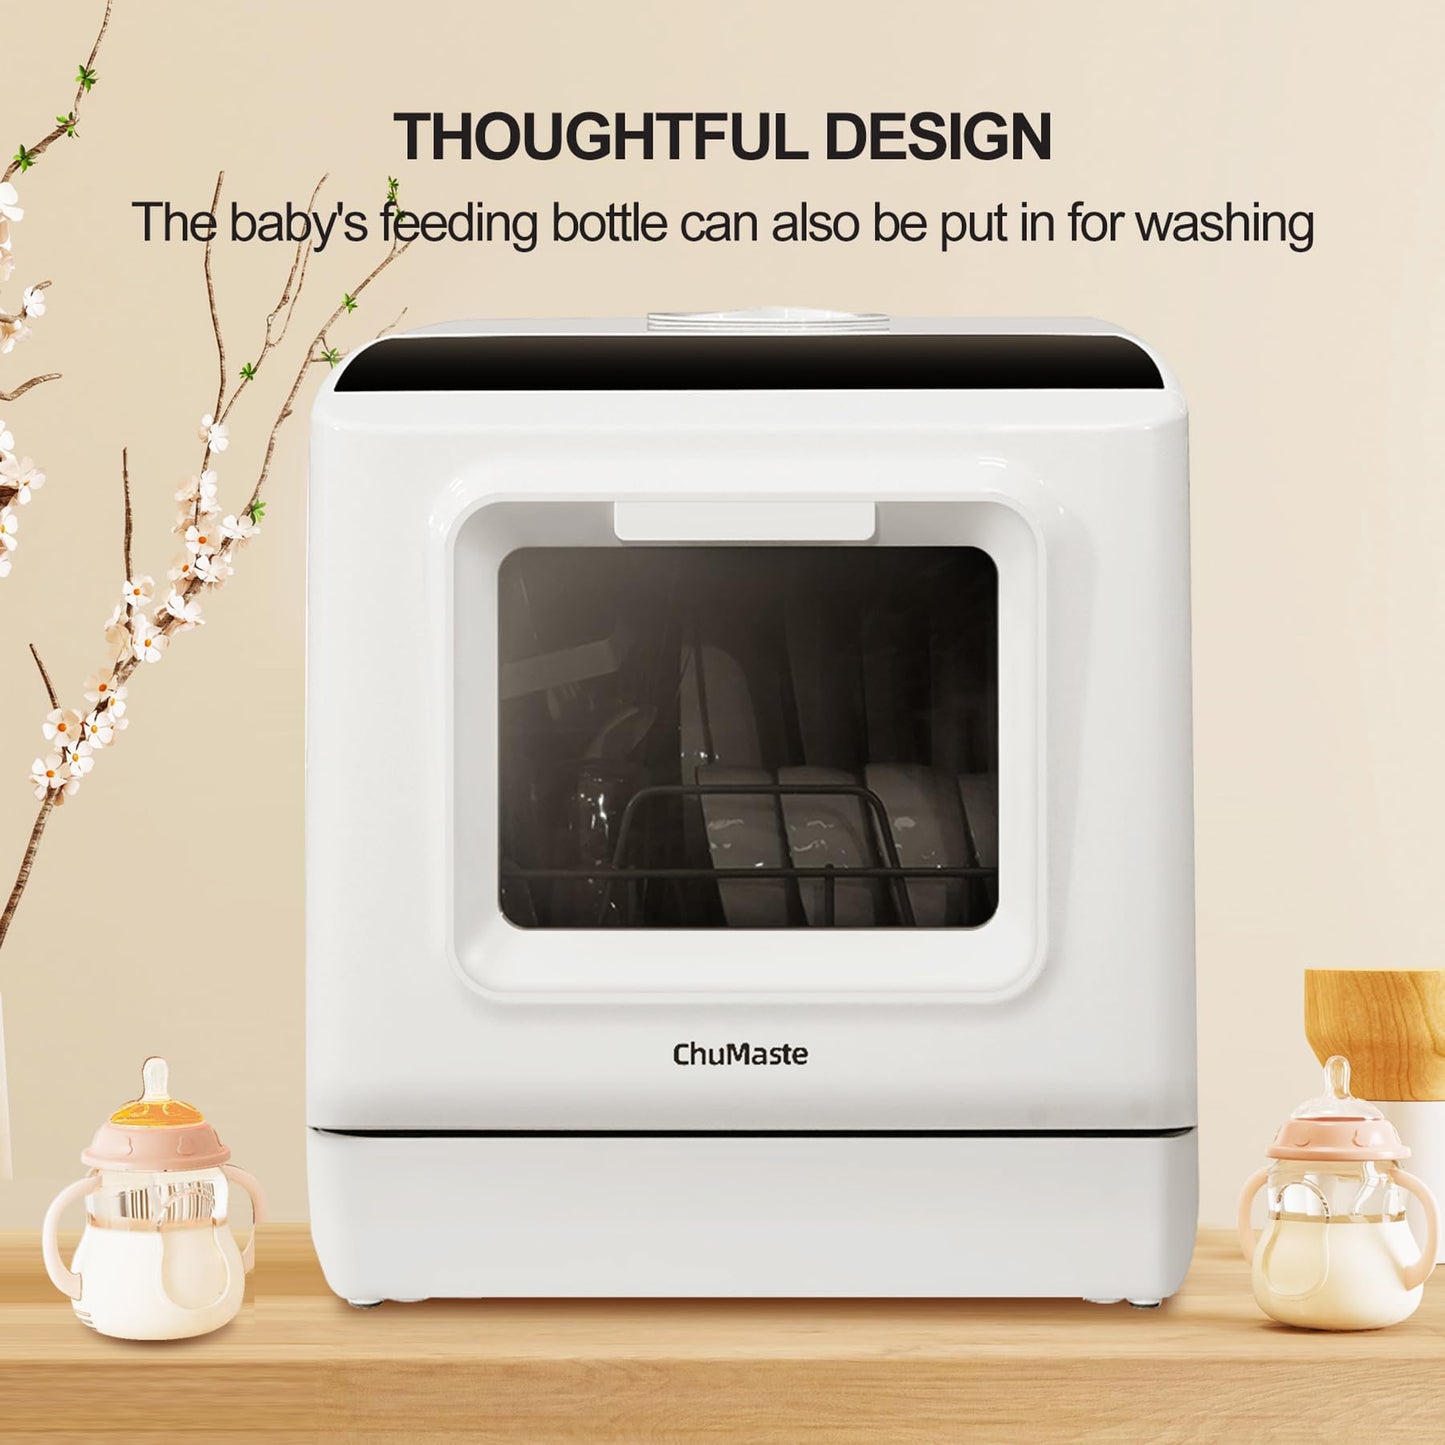 ChuMaste dishwasher, countertop dishwasher with water tank,countertop dishwasher with 5 washing programs, portable dishwasher can also be connected to the tap.